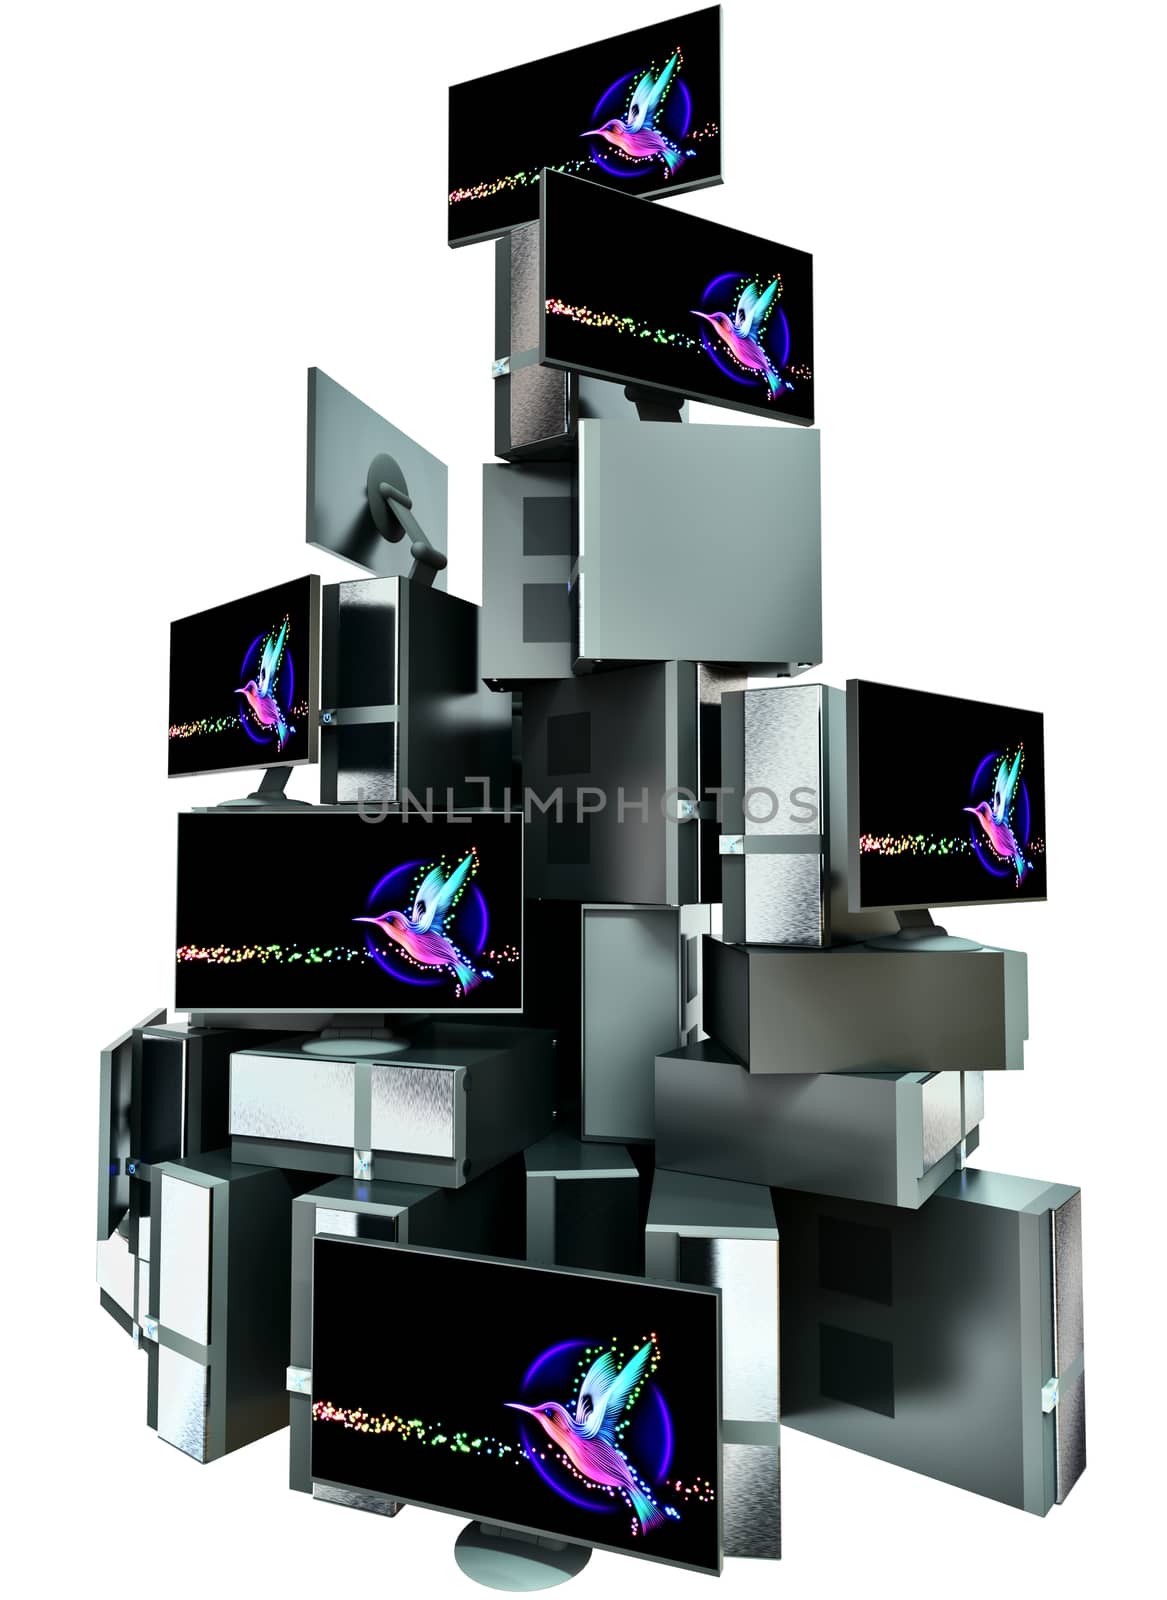 A set of multiple computers assembled in the composition in the form of high pyramid on white background. 3d illustration concept.